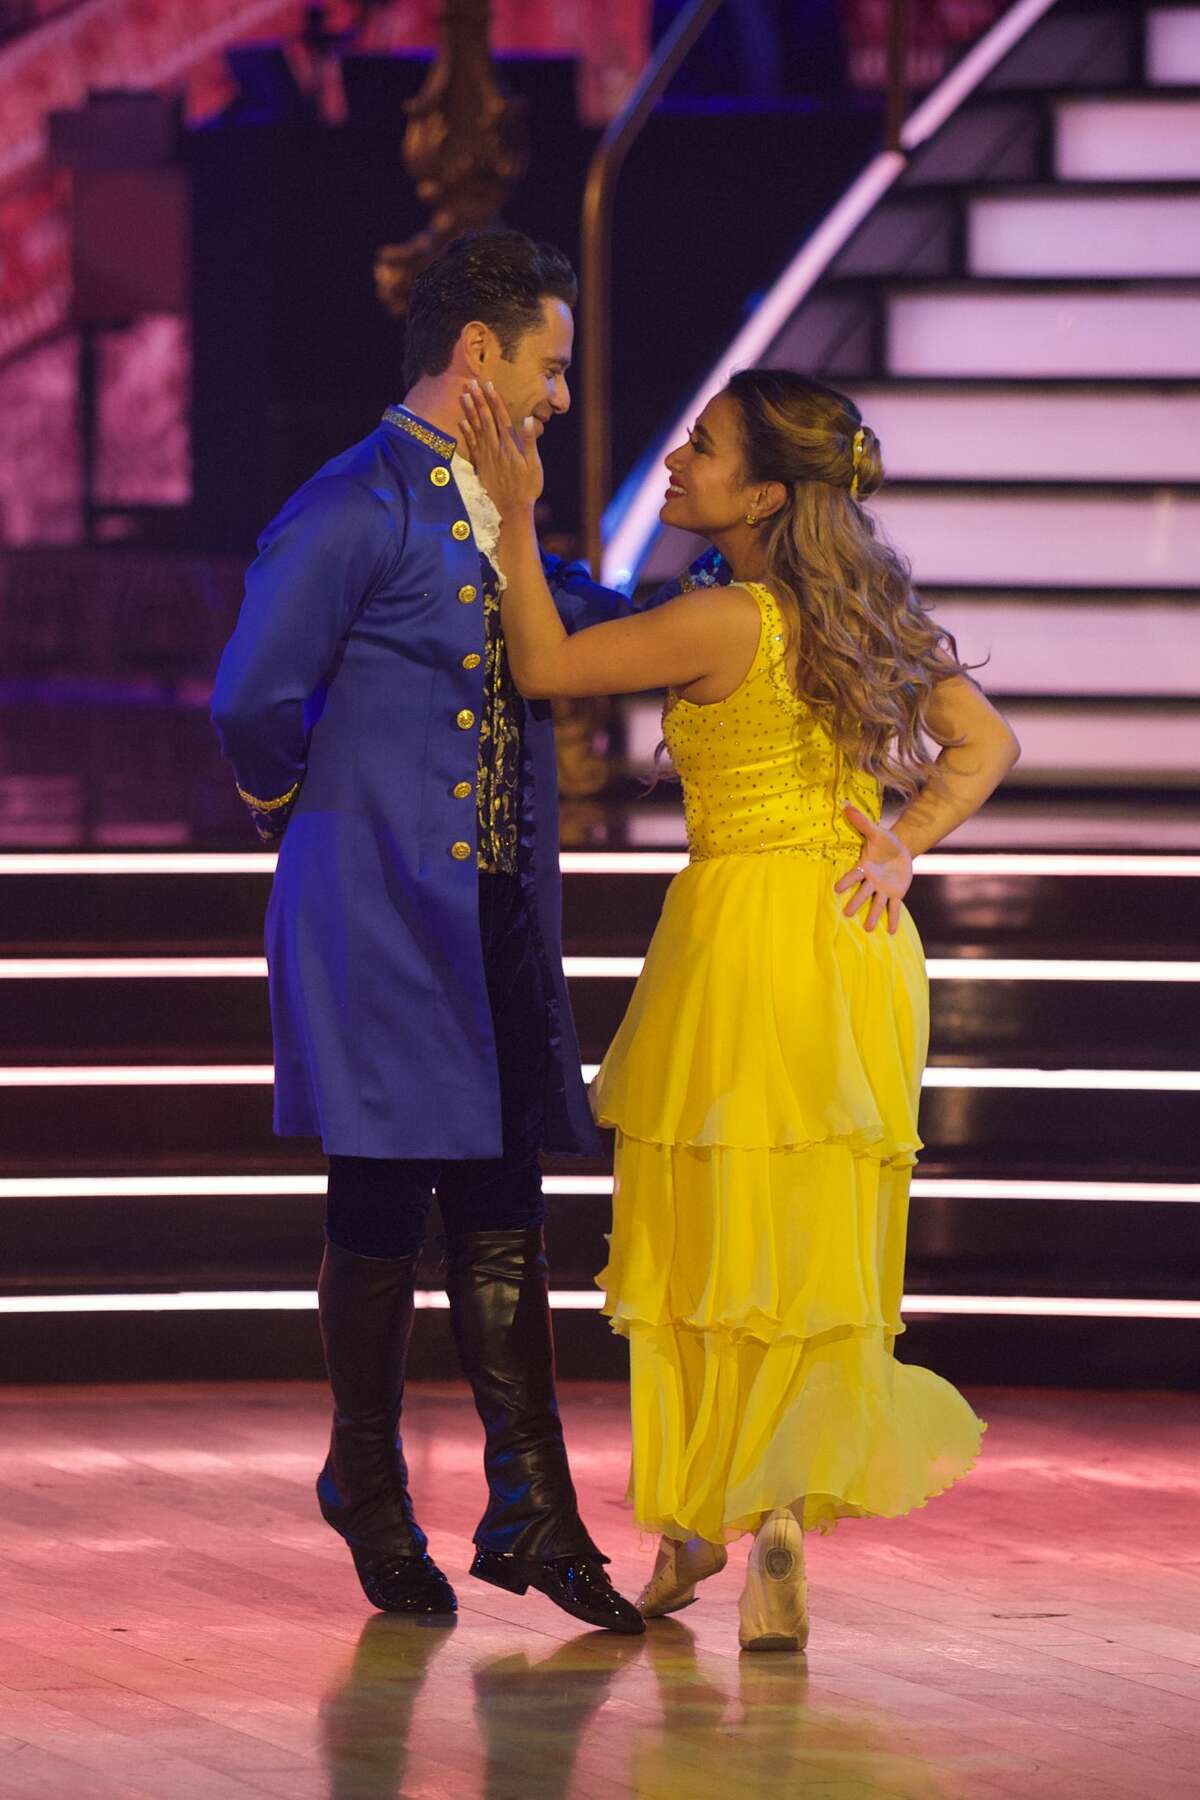 On Monday night's "Dancing with the Stars" Disney episode, Ally Brooke and her partner Sasha Farber were given the first 9s of the season after the duo performed to "Beauty and the Beast" by Ariana Grande and John Legend. 